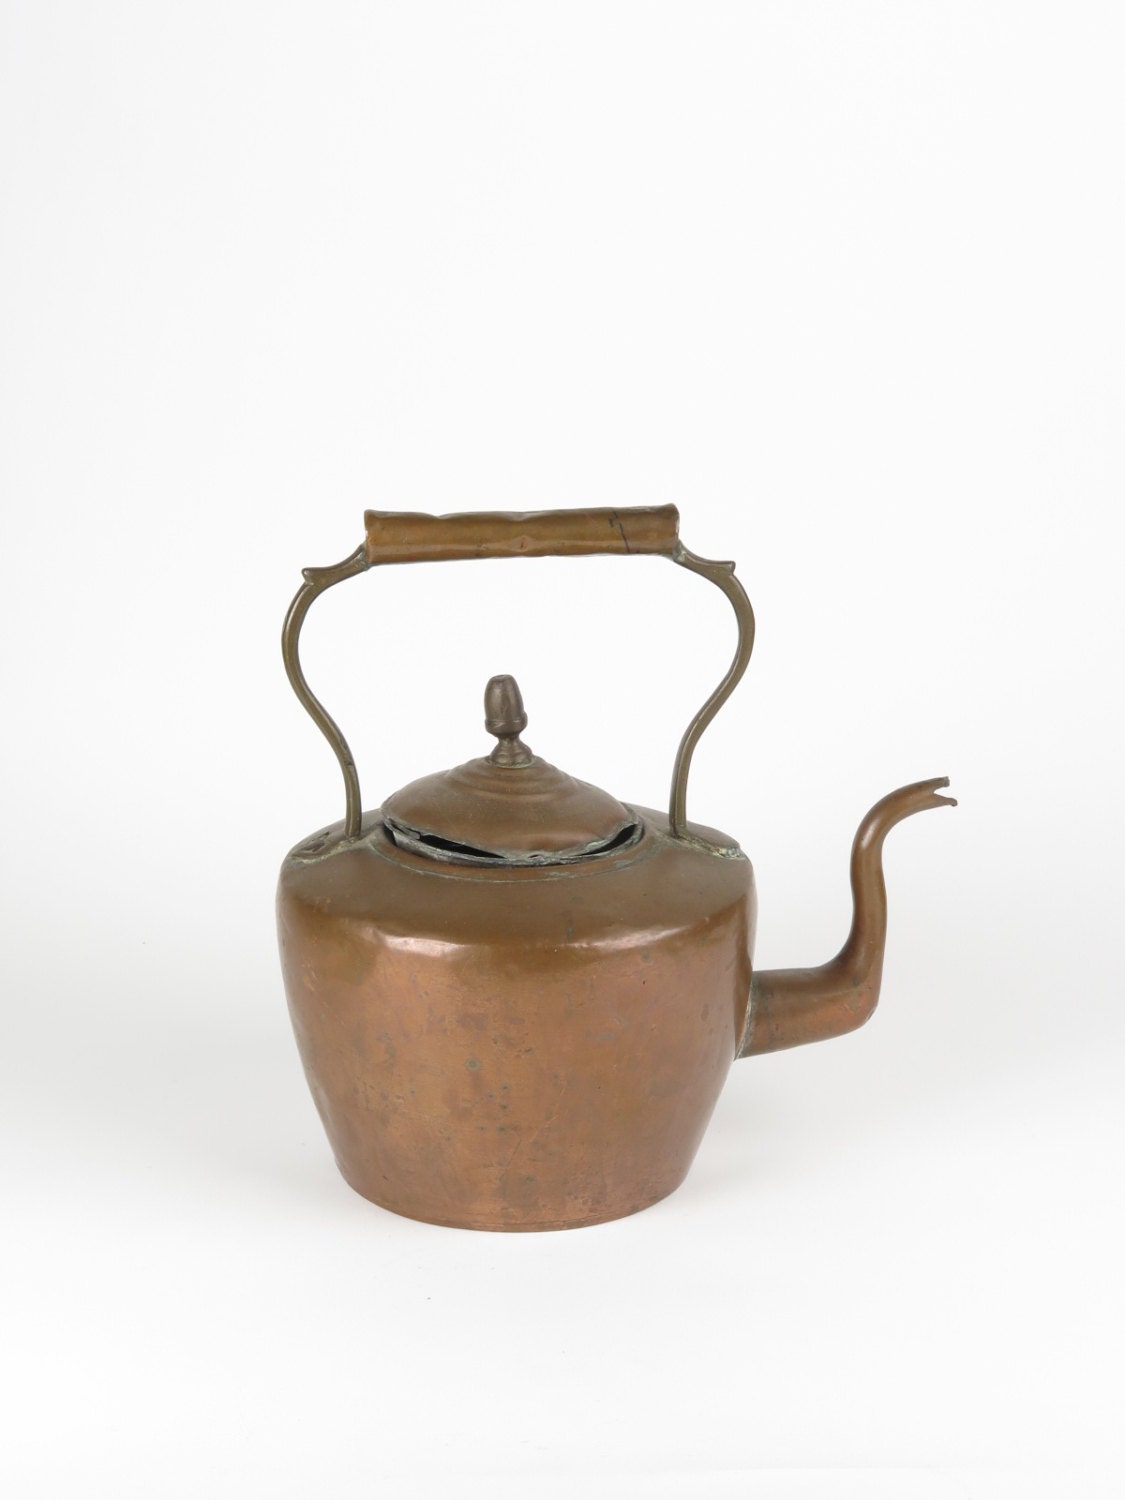 The Classic Copper English Tea Kettle - Coming Soon - Email to